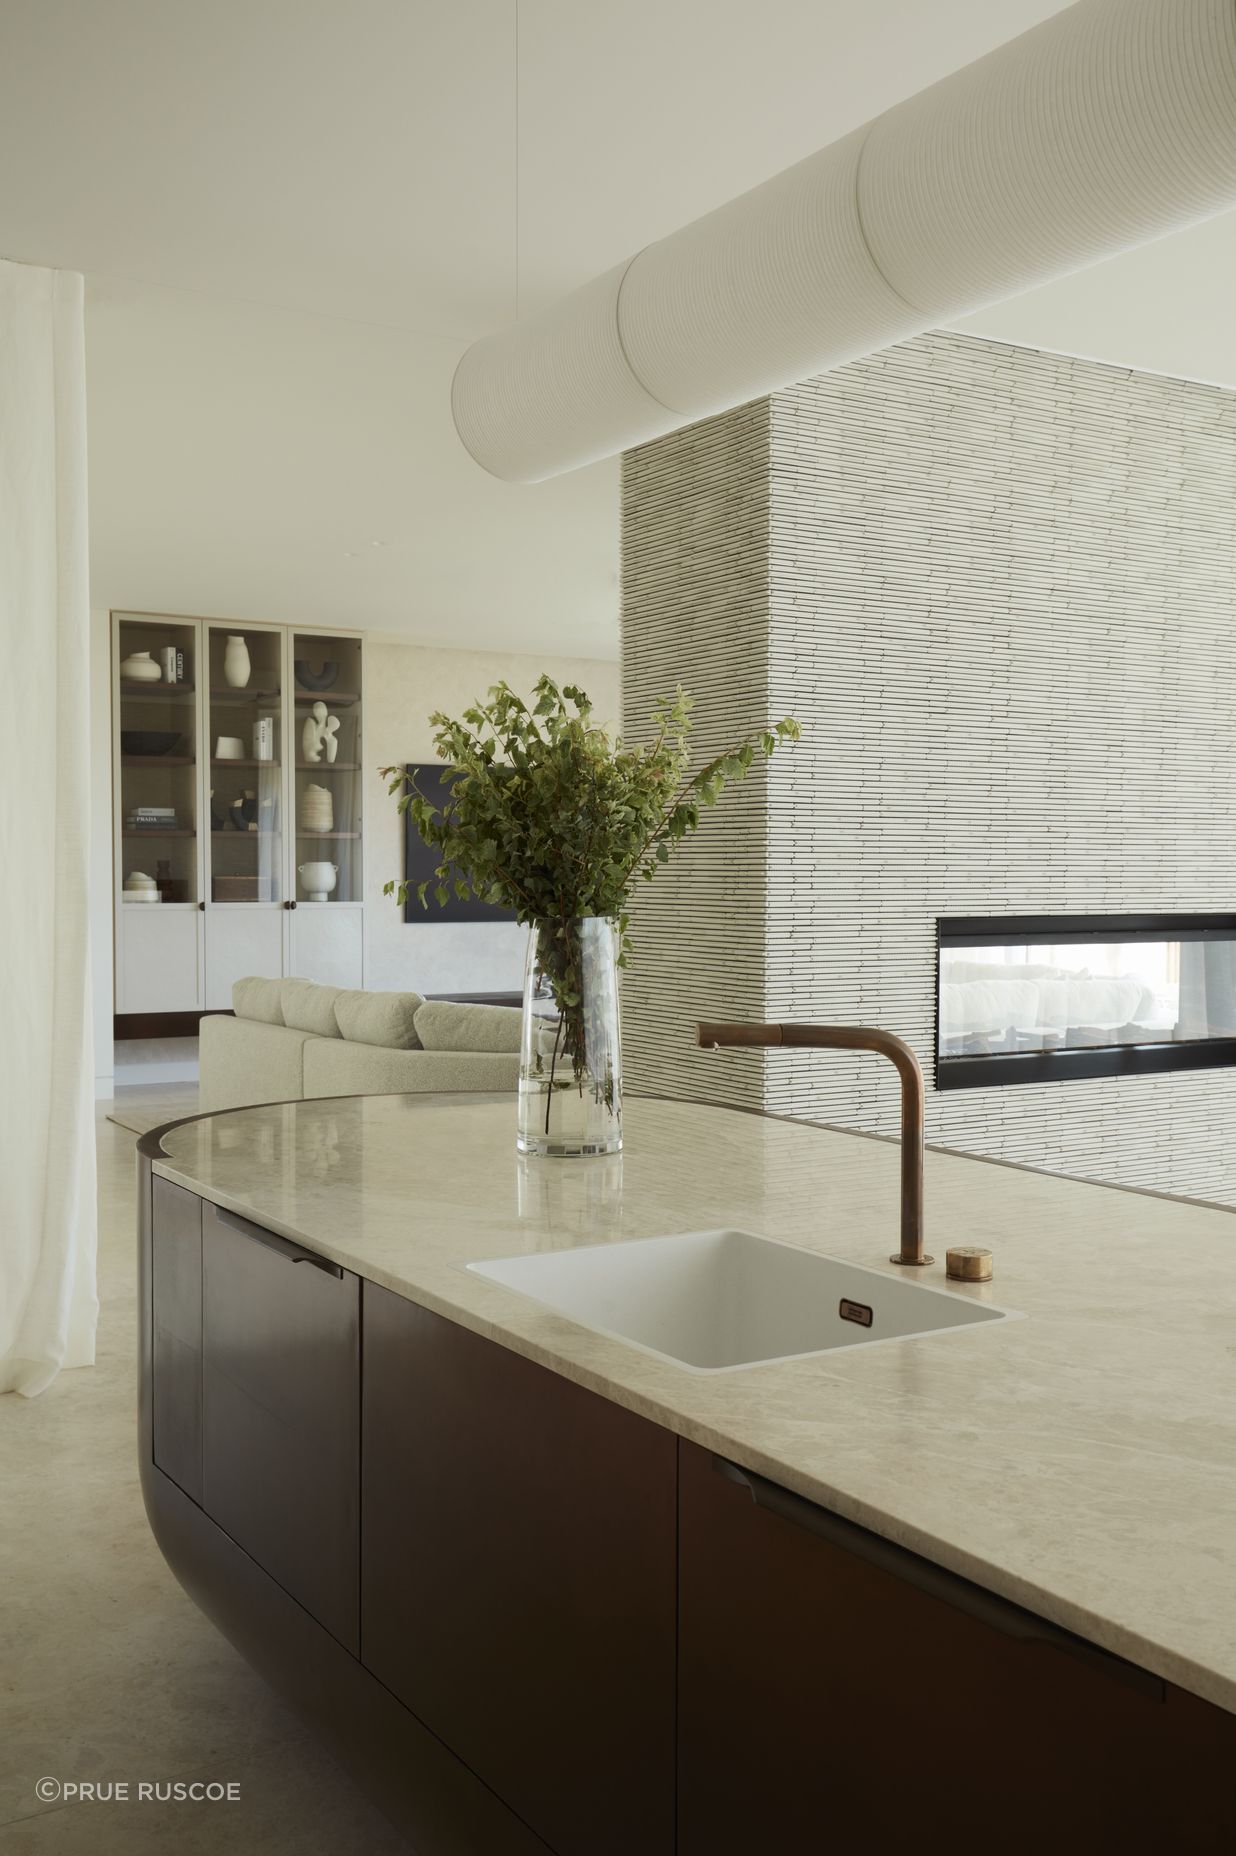 Tiles, marble and metal in the kitchen